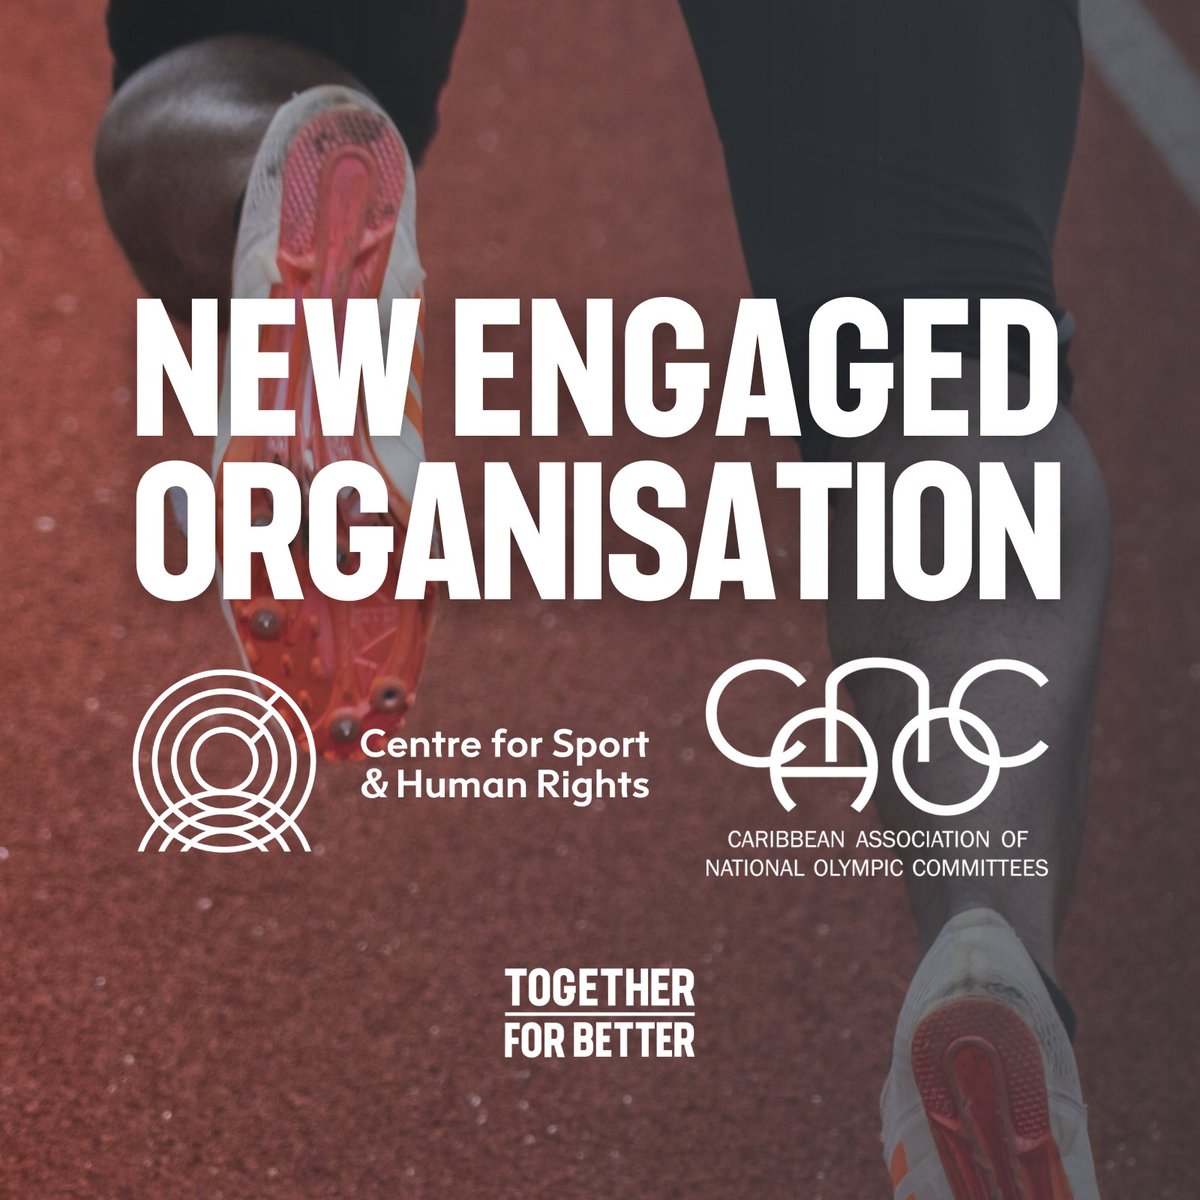 🚨 New Engaged Organisation! We are proud to announce that the Caribbean Association of National Olympic Committees has joined Centre’s multi-stakeholder network working to advance responsible #sport More info 👉 bit.ly/4bw5g6R @CanocSports | #TeamHumanRights